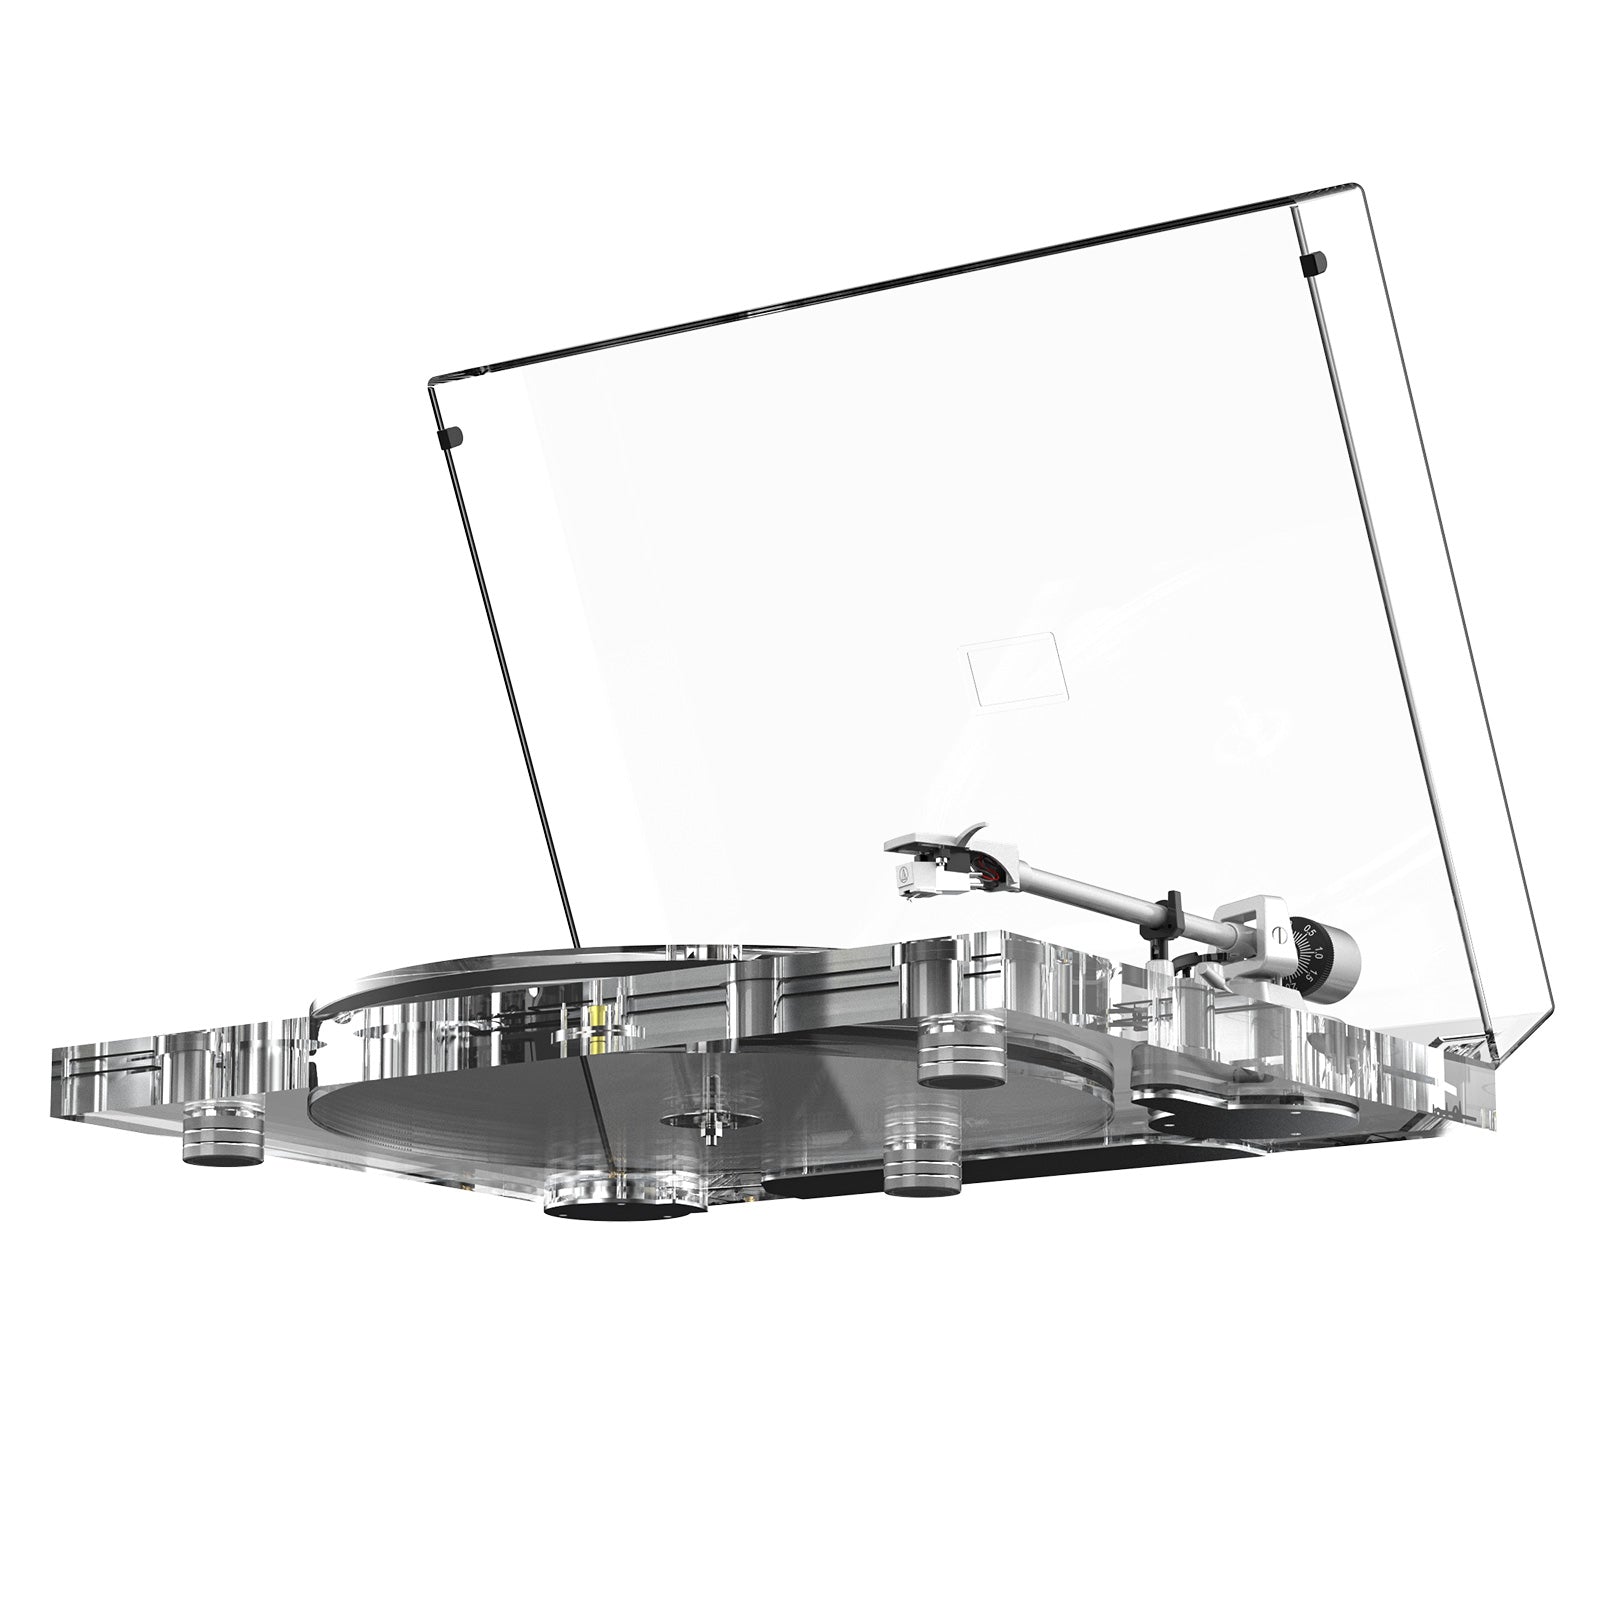 Belt Driven High Fidelity Fully Transparent Acrylic Turntable ICE1